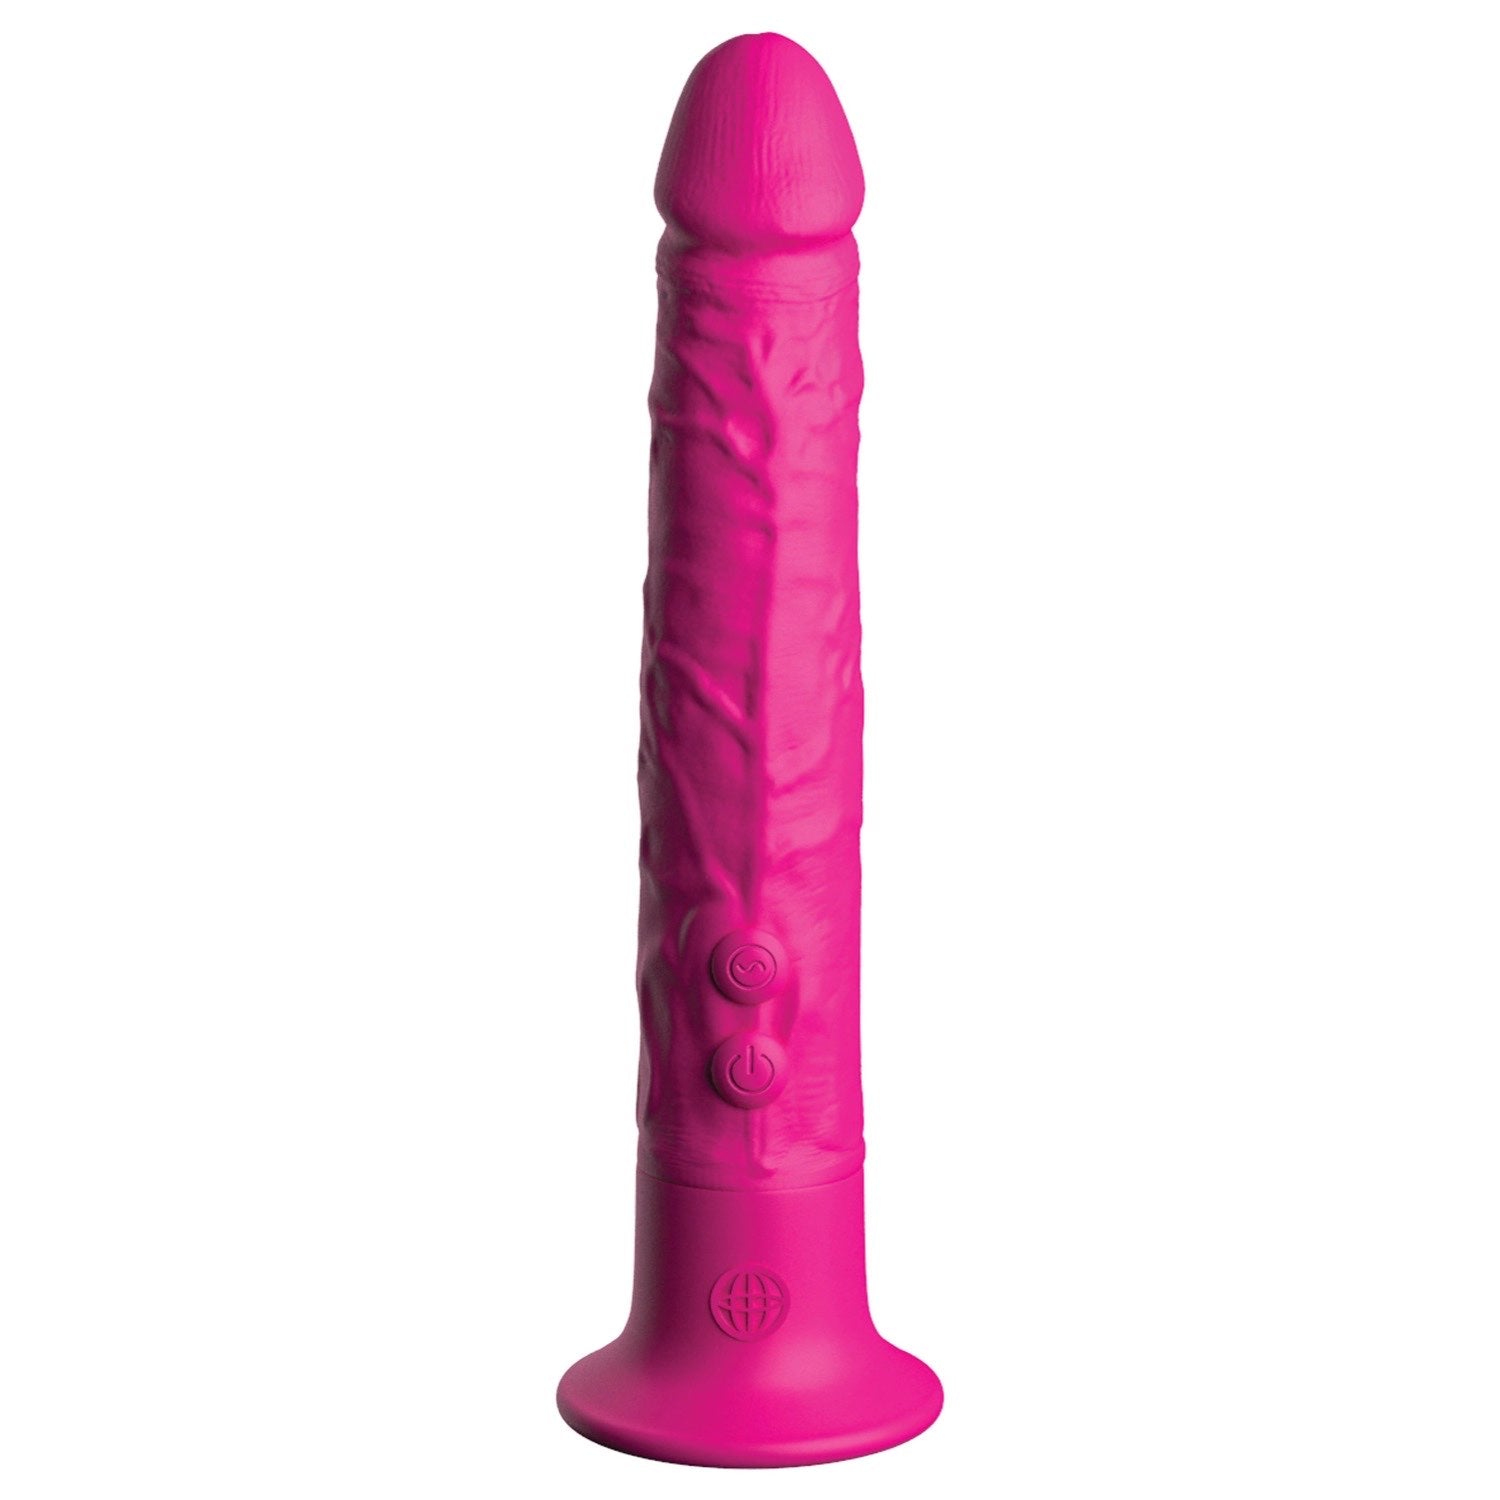 Classix Wall Banger 2.0 - Pink 19.1 cm Vibrator by Pipedream